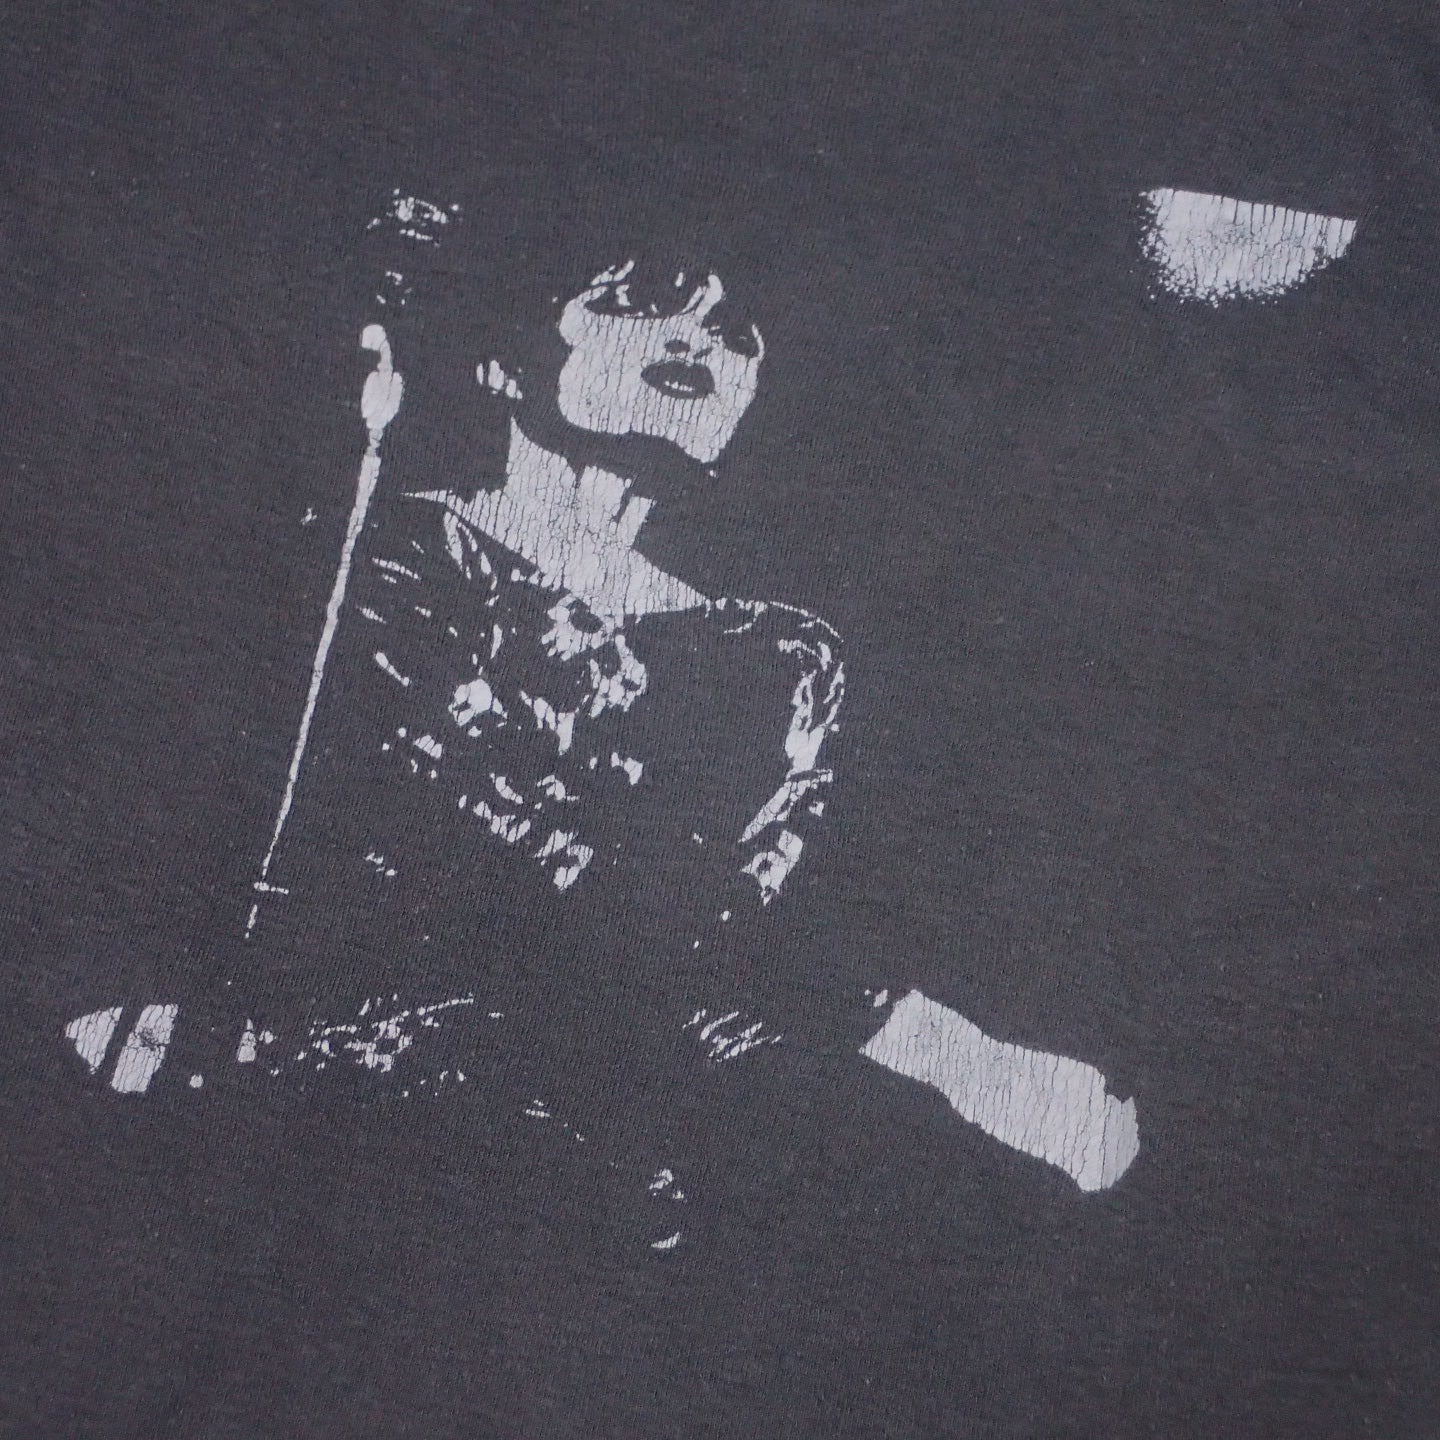 70s Siouxsie and the Banshees T-shirt "Siouxsie Sioux Tee"